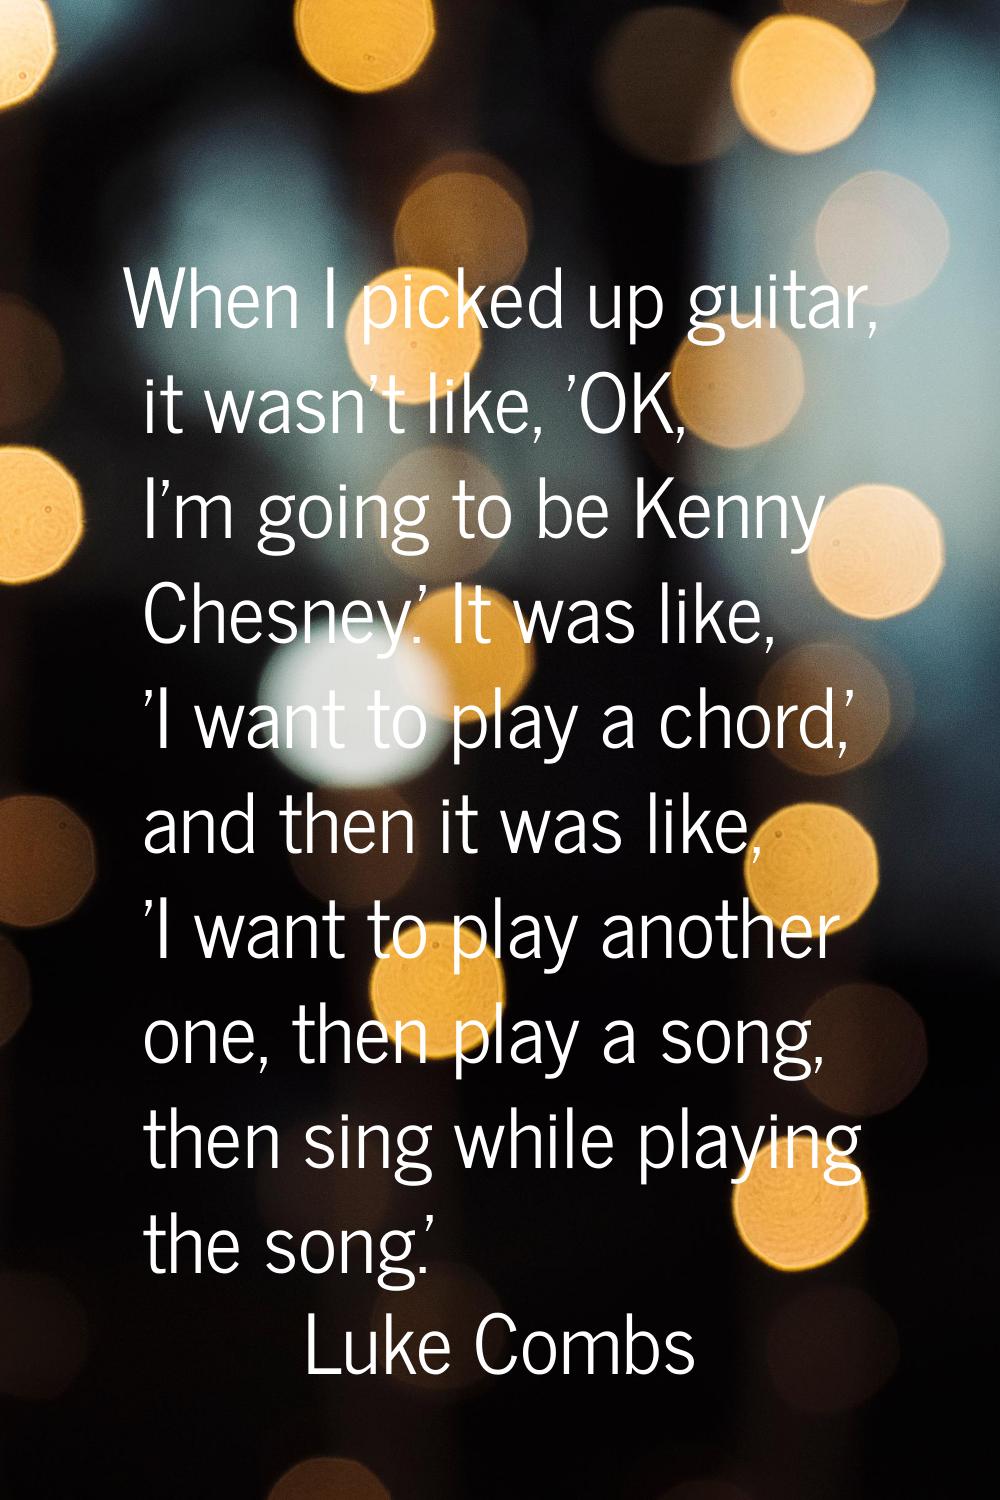 When I picked up guitar, it wasn't like, 'OK, I'm going to be Kenny Chesney.' It was like, 'I want 